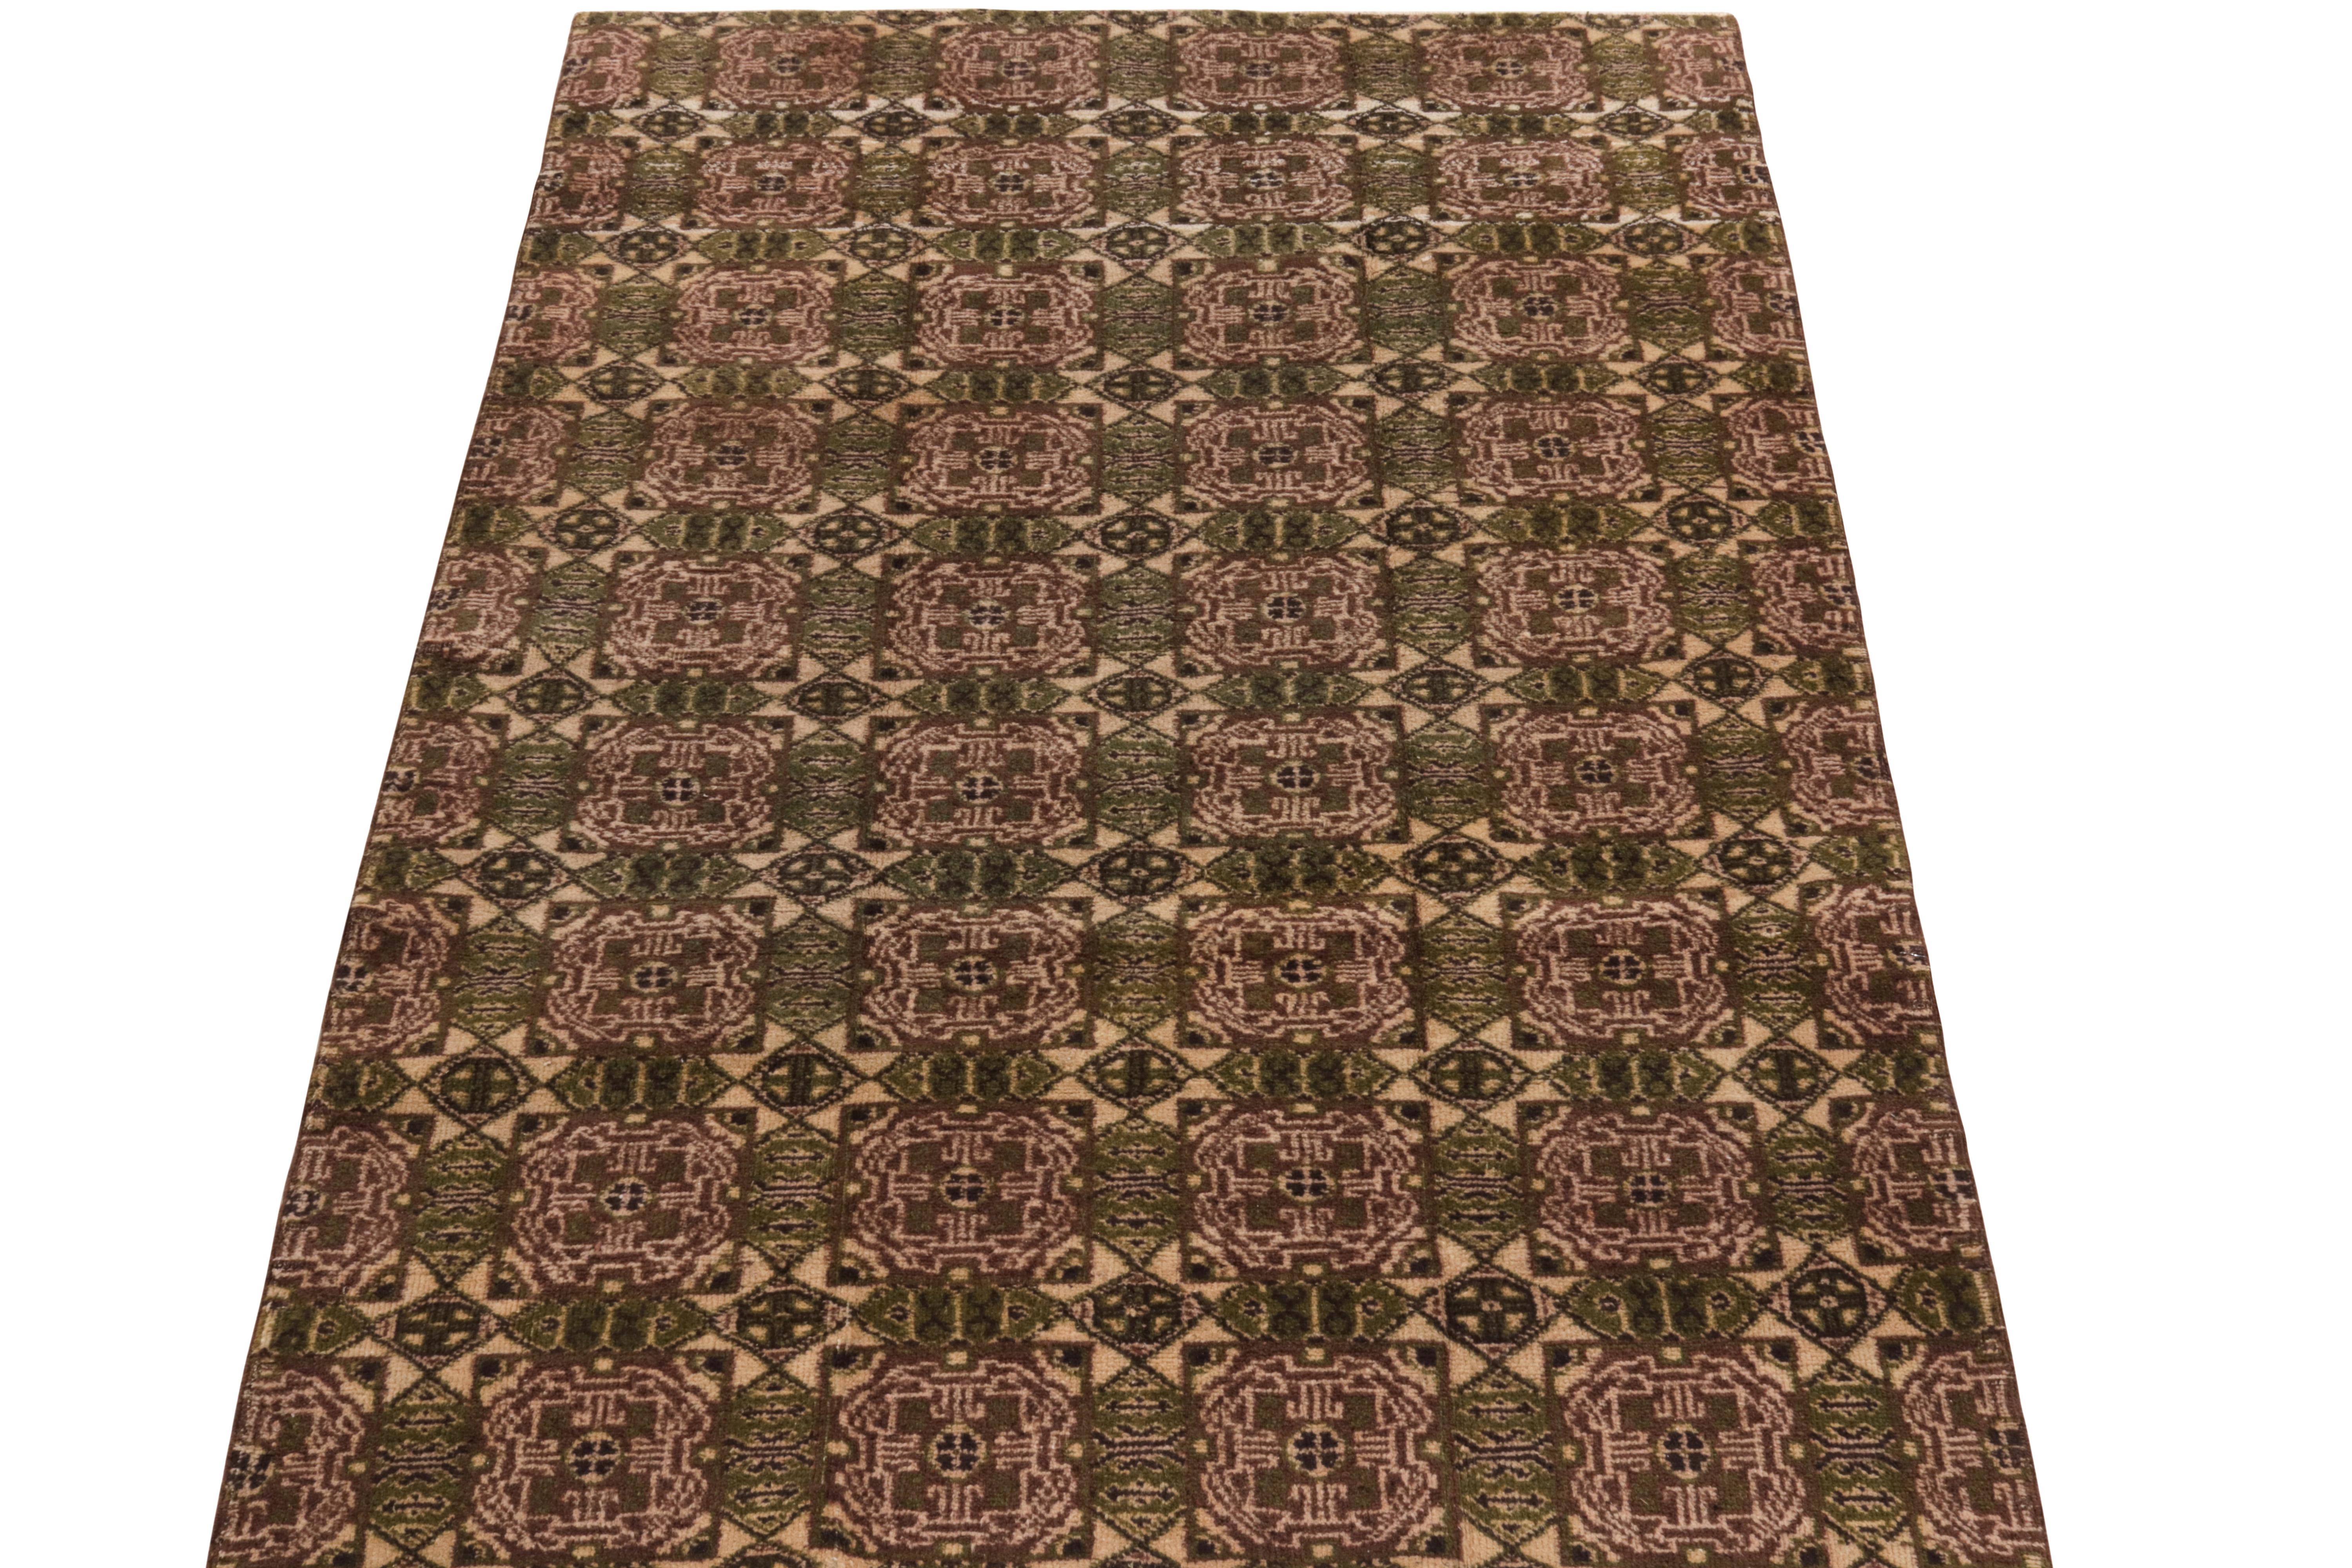 Hand-knotted in wool, a 4x7 distressed vintage rug from our mid century Pasha collection, commemorating the works of an exemplary Turkish artist. 

The 1960s style takes an intriguing liberty with geometric deco sensibilities for creating